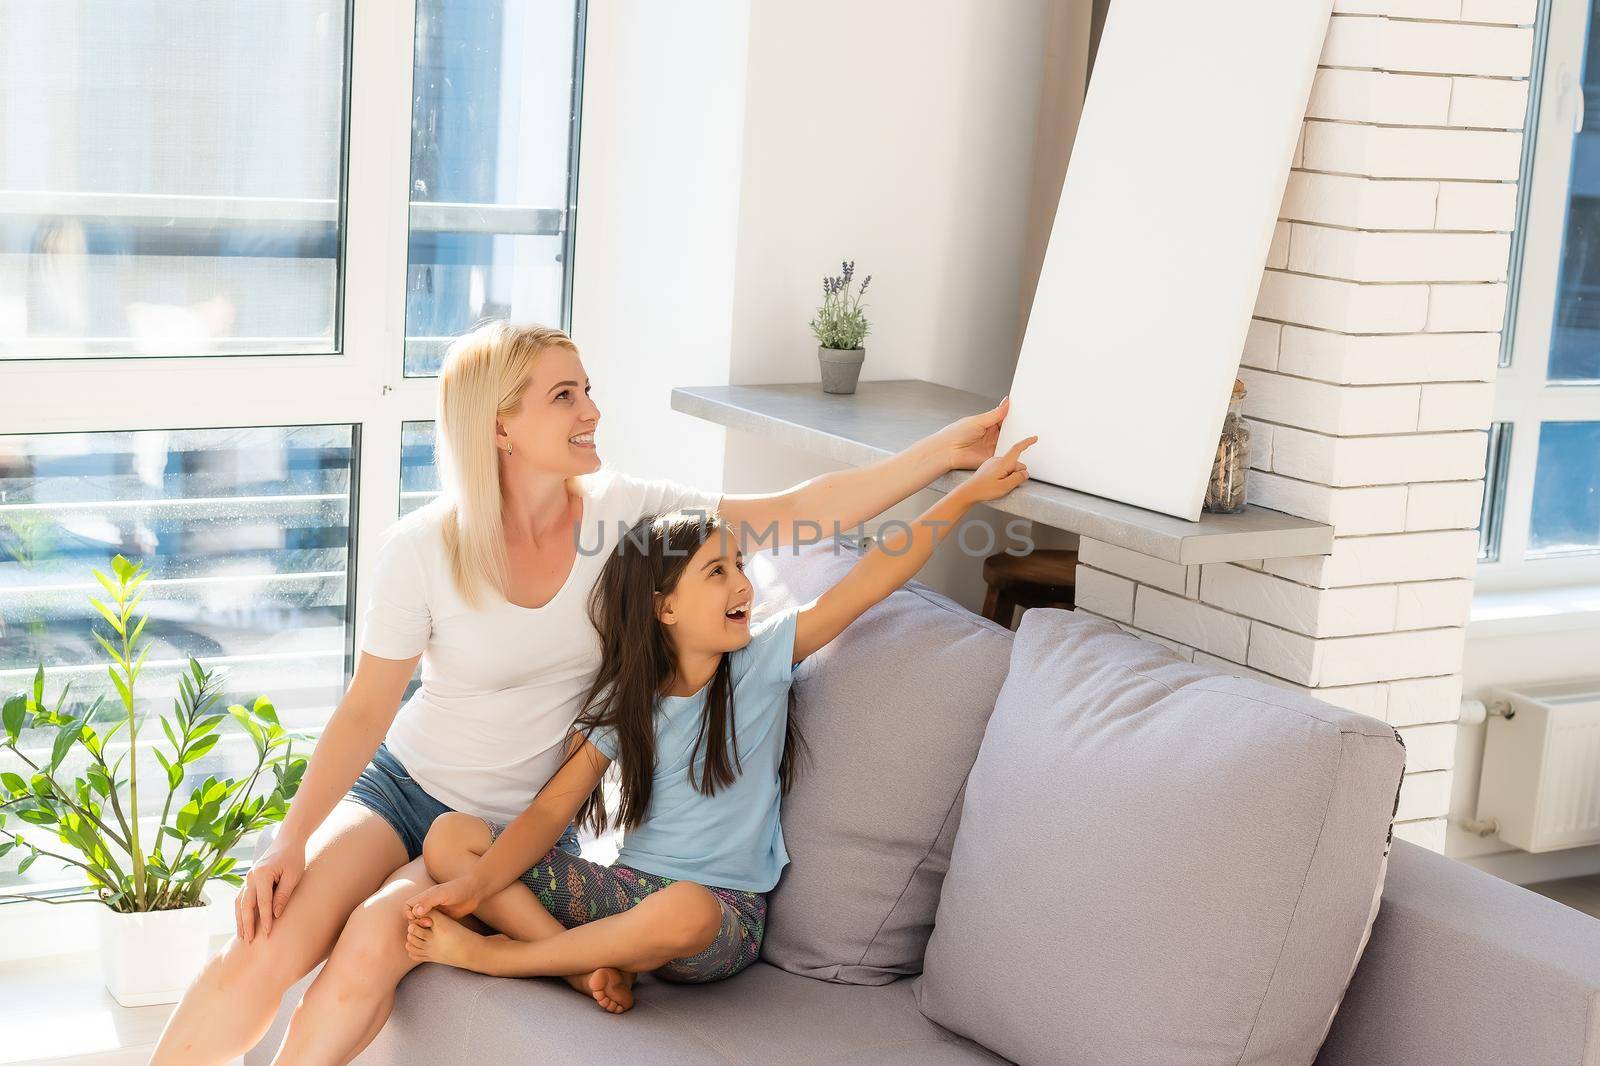 mother and daughter hold photo canvas at home